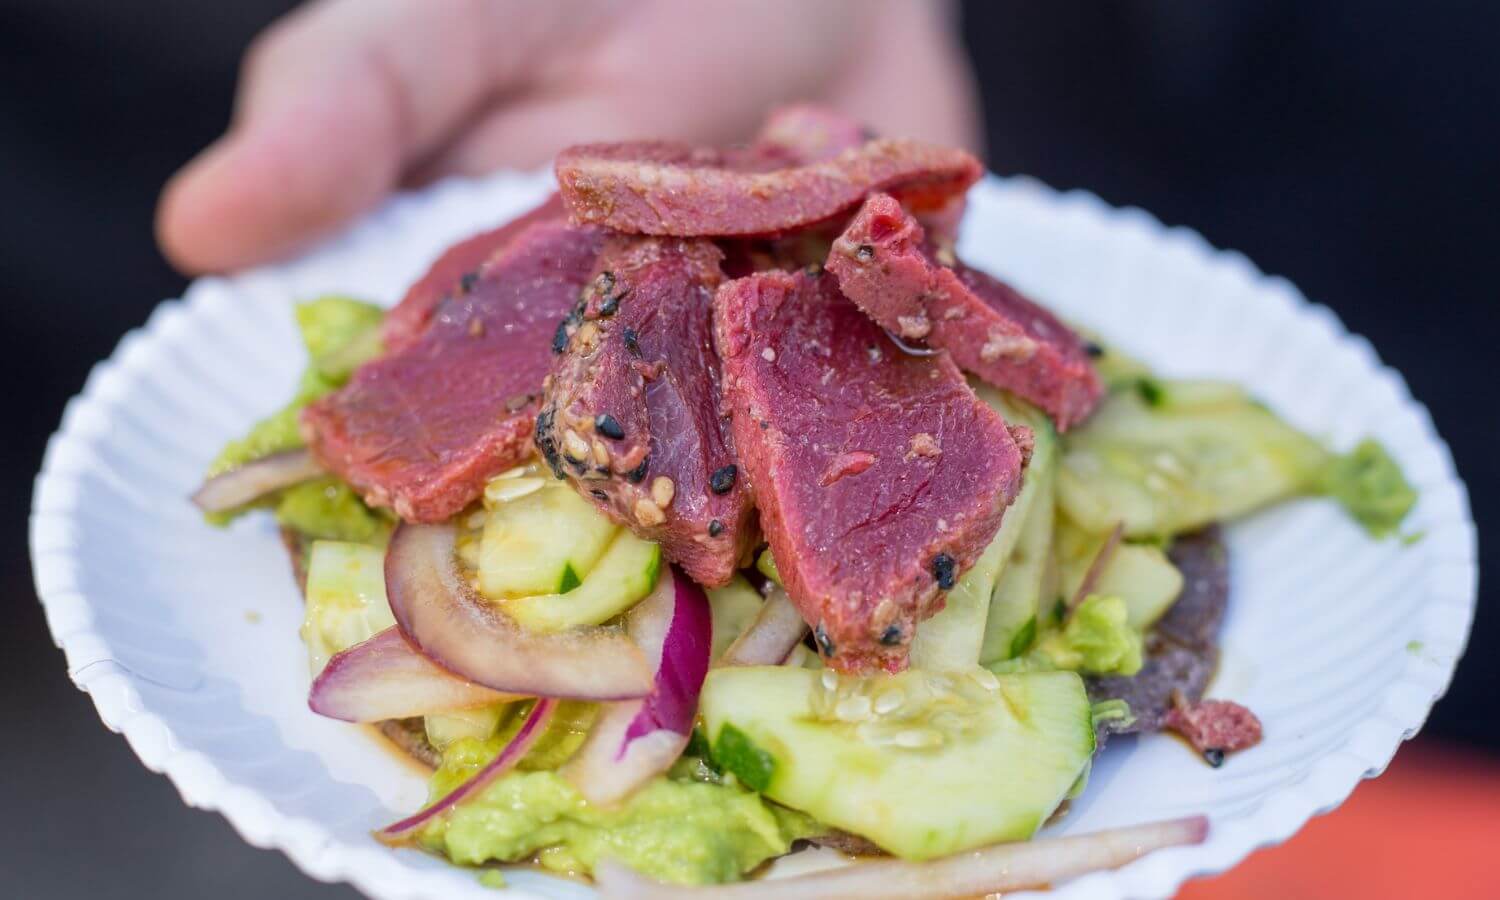 A plate of seared tuna at a food festival in Mexico.